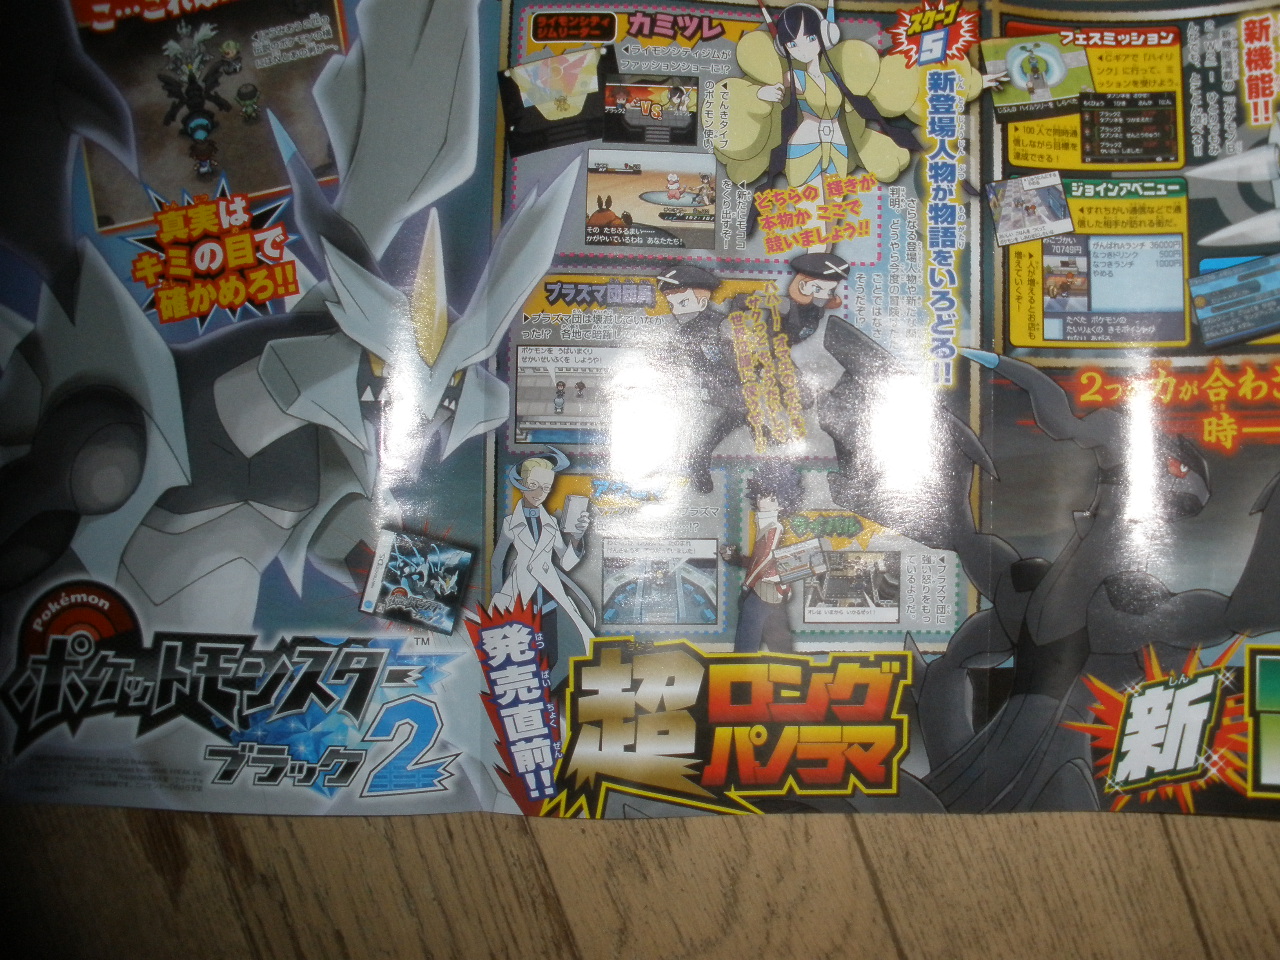 Corocoro Comics Issue 7 Showcases New Keldeo Form And Other B2w2 Designs Pocketmonsters Net